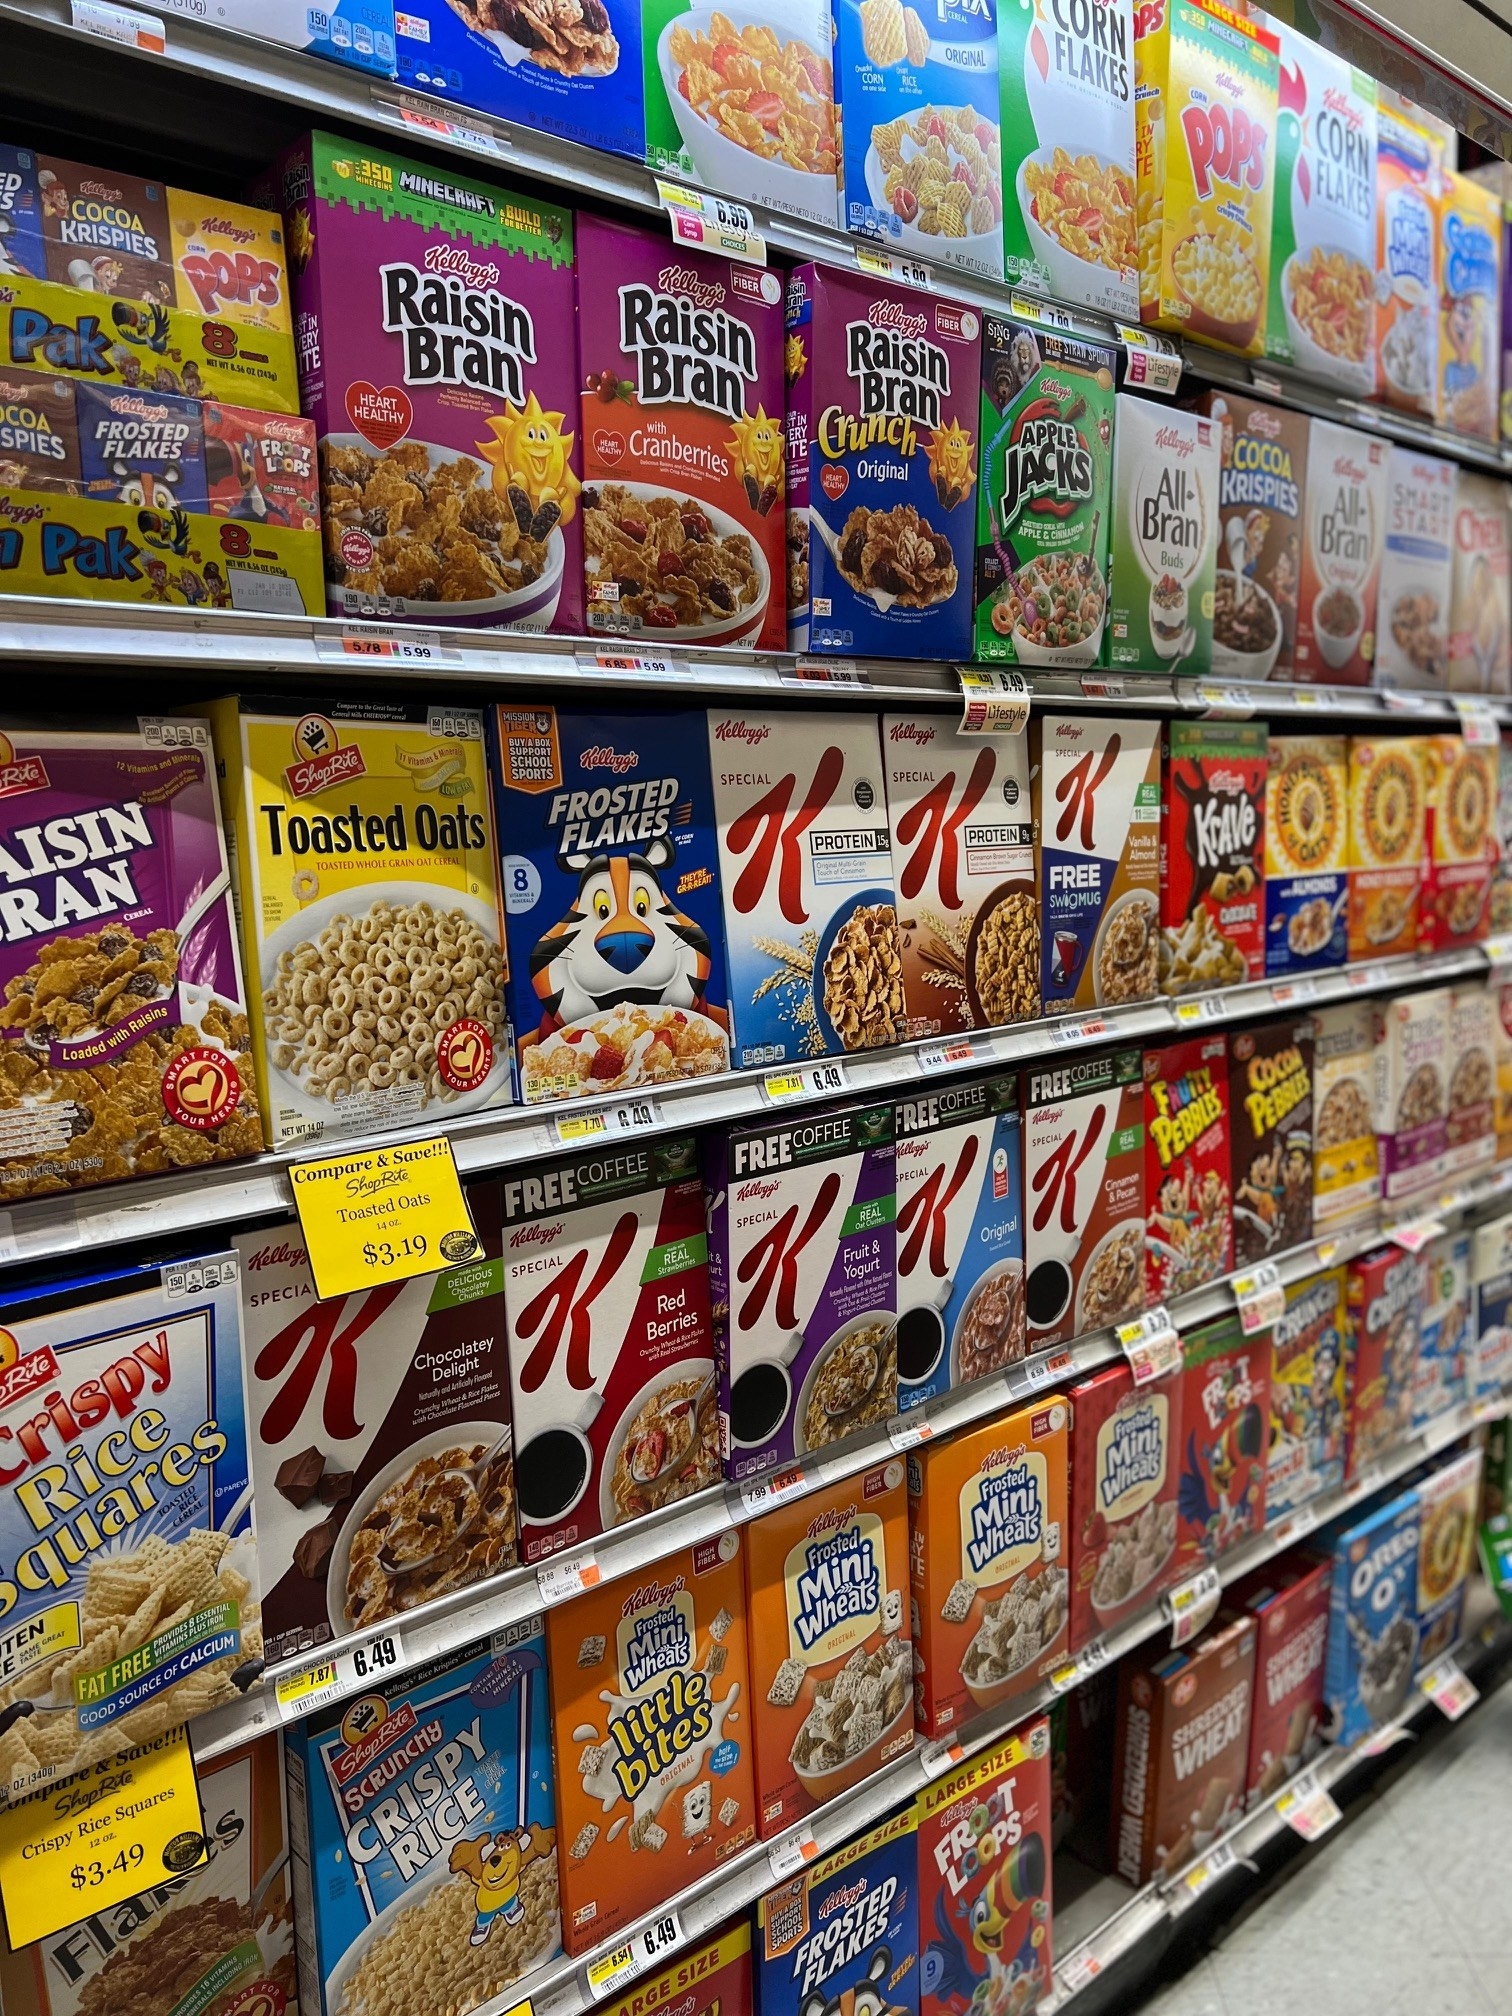 A grocery aisle with many rows of cereal